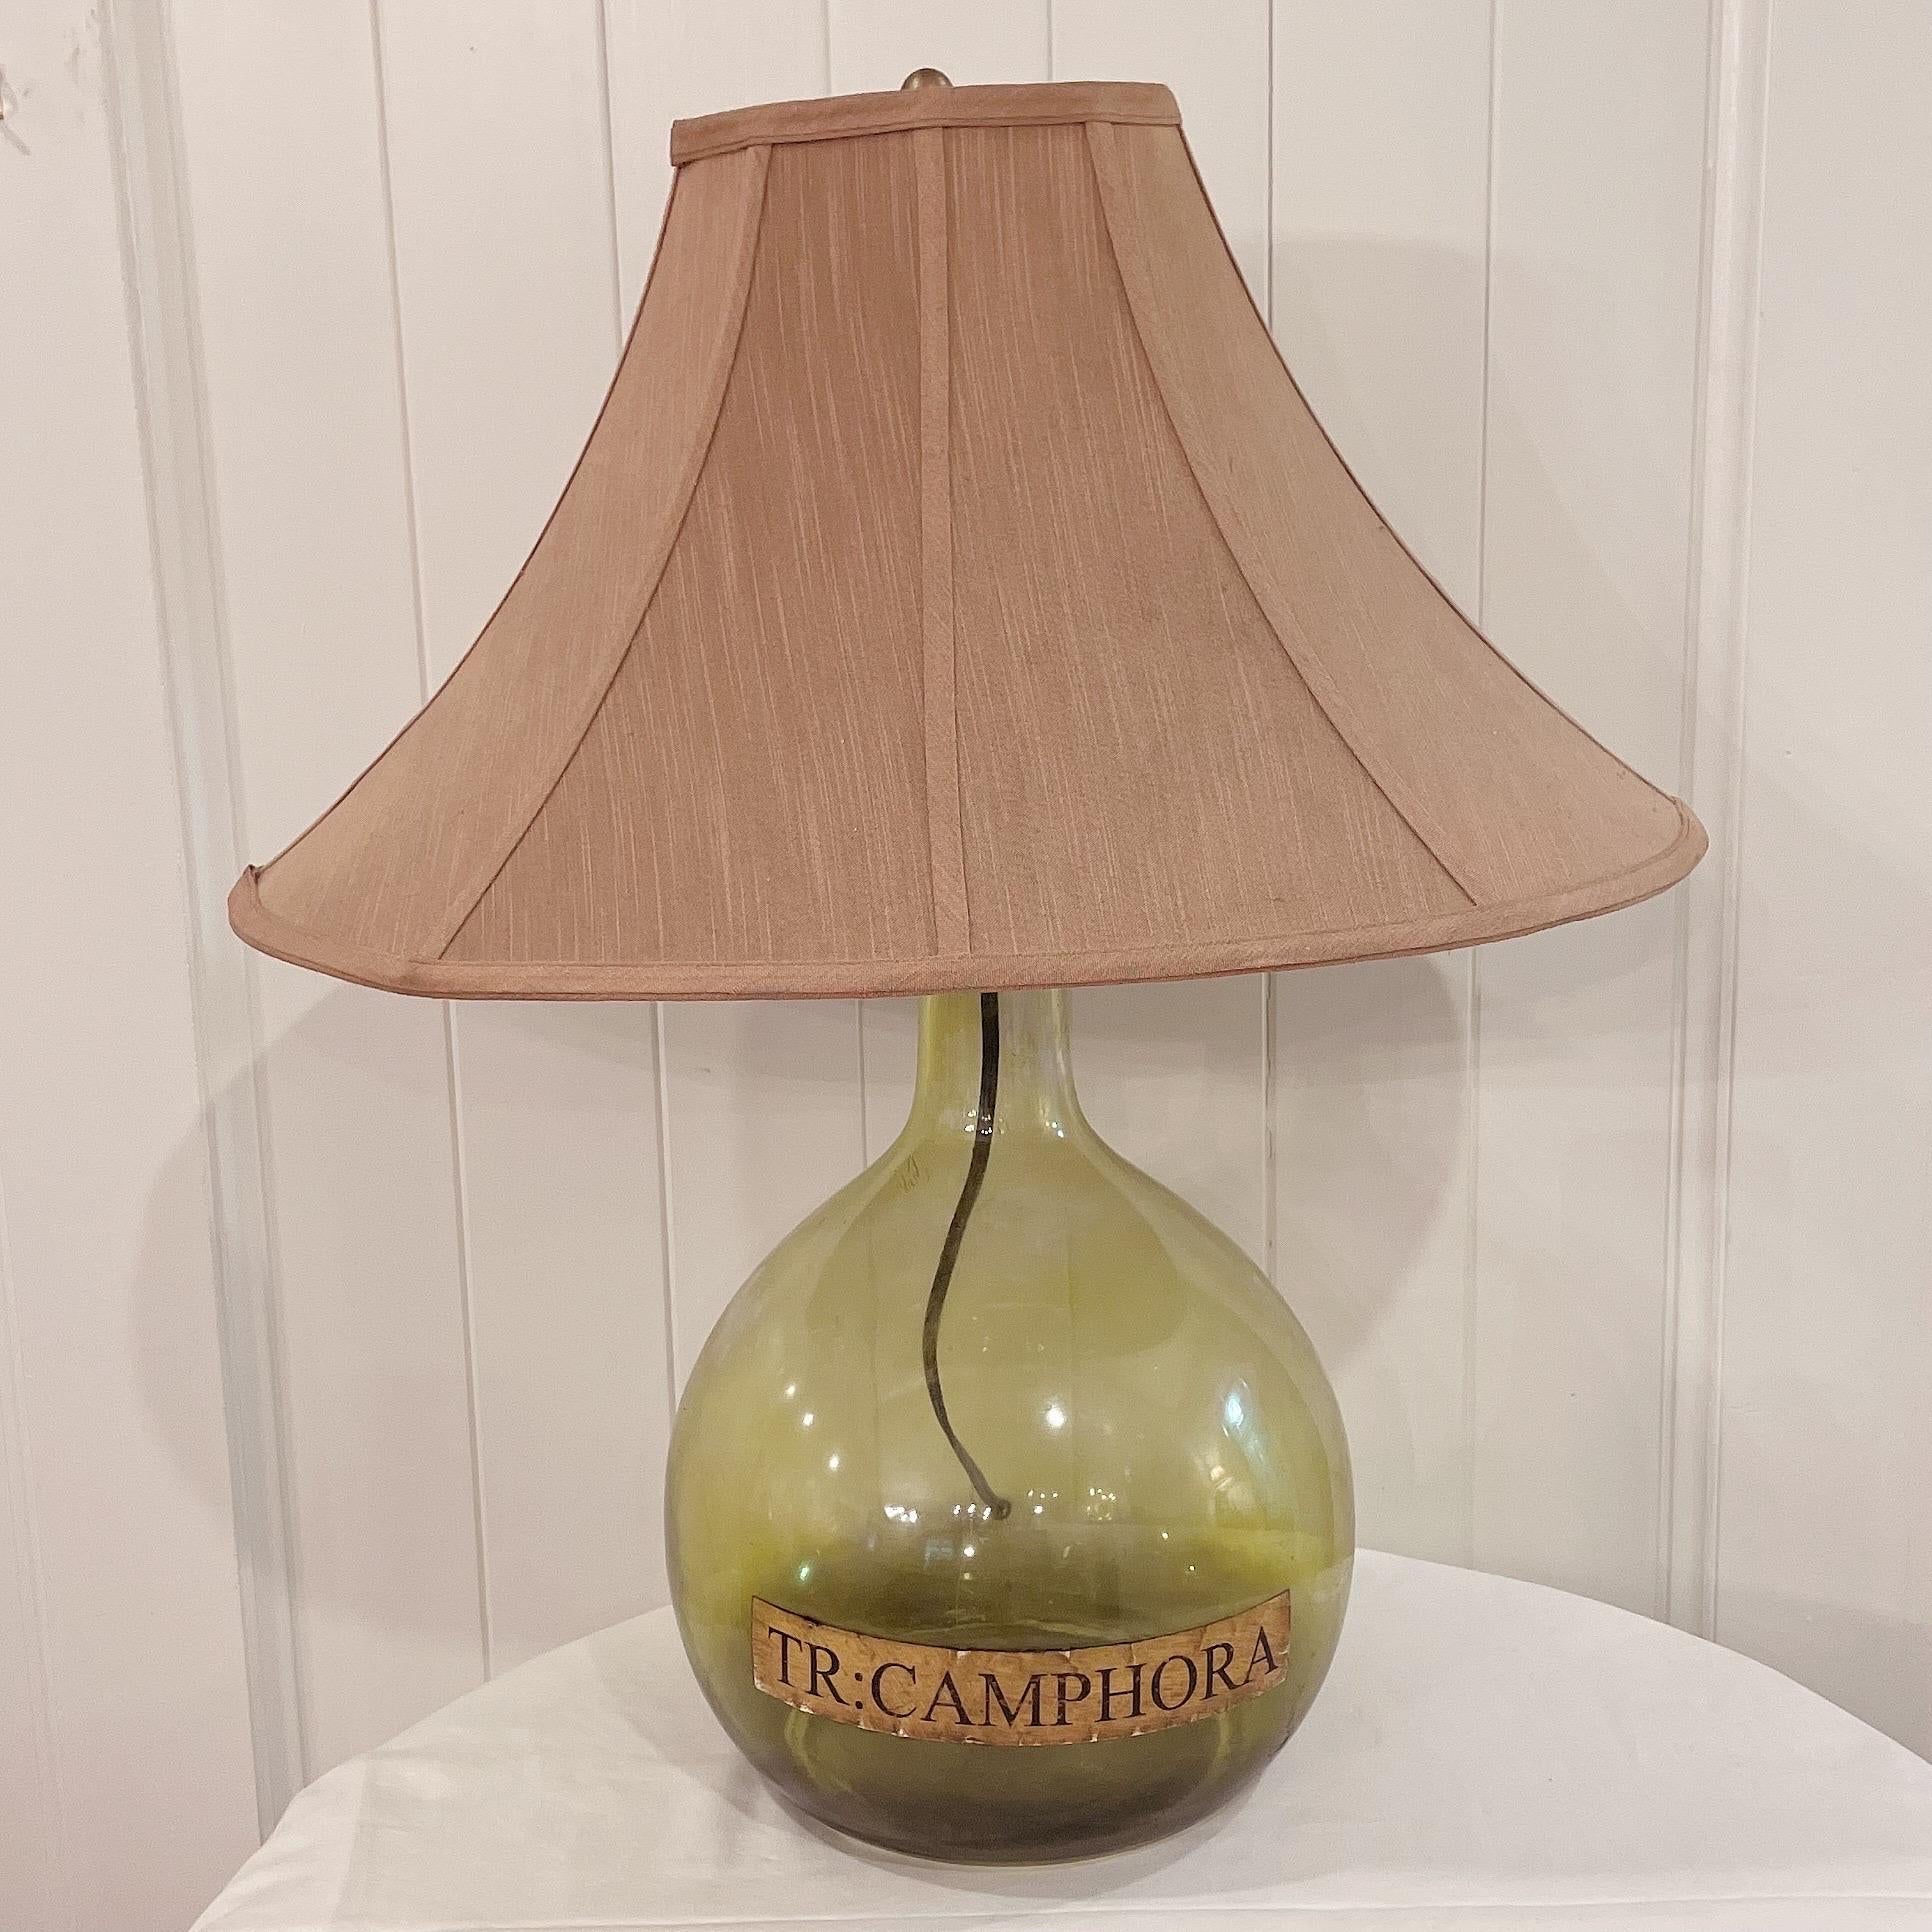 Mid 20th Century Vintage European Carboy Green Glass Bottle Demijohn Lamp  In Good Condition For Sale In Cookeville, TN